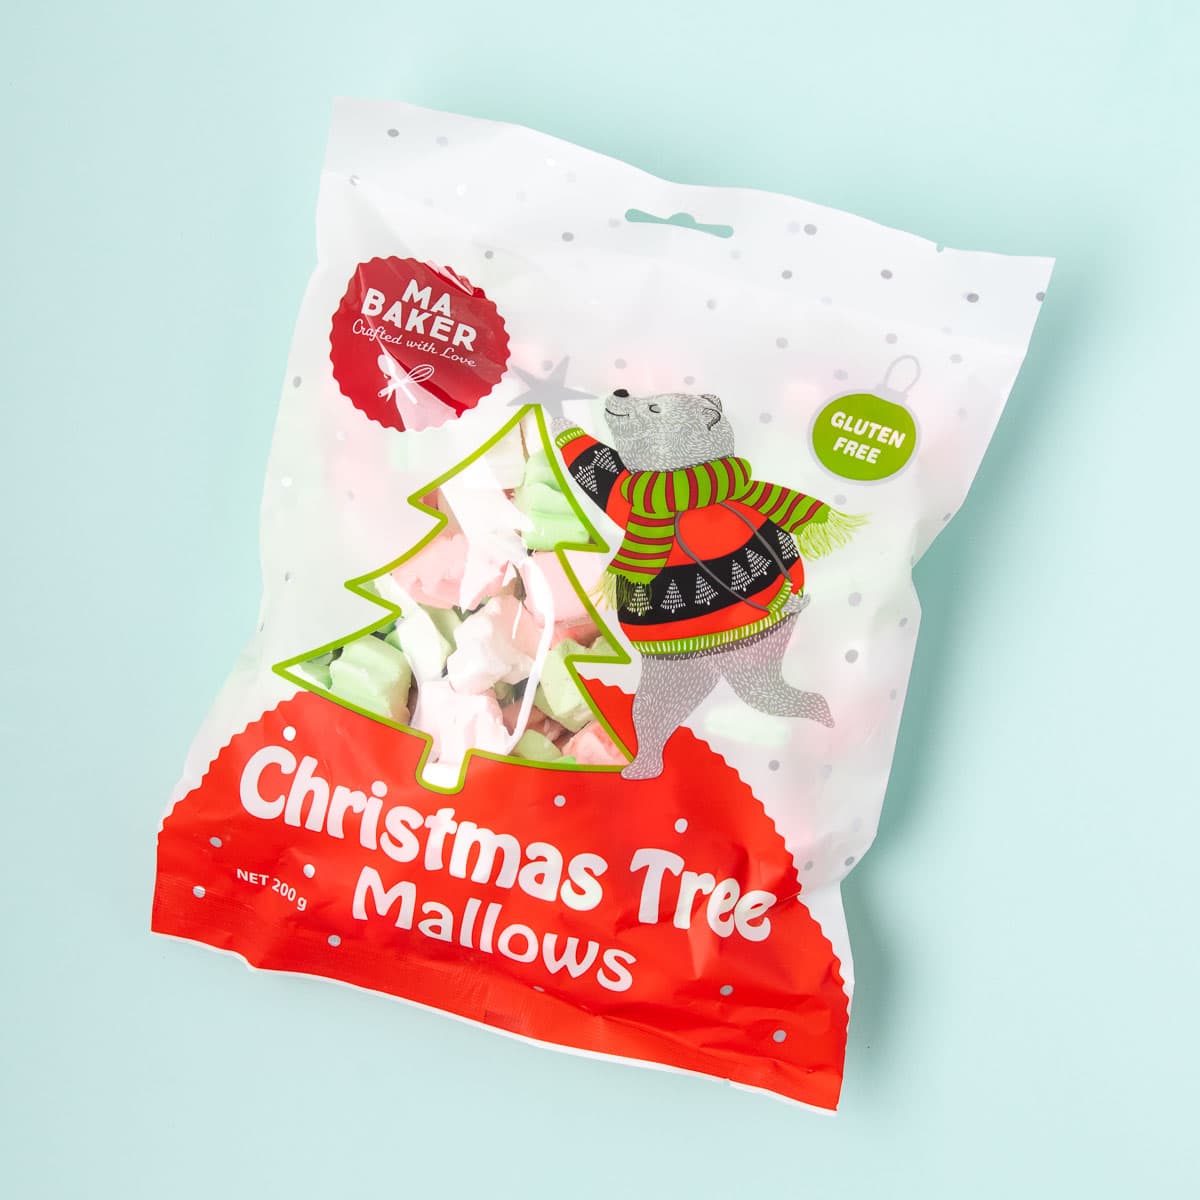 A white and red packet of Ma Baker Christmas tree-shaped marshmallows, with a clear tree-shaped window showing the pink, green and white marshmallows inside.